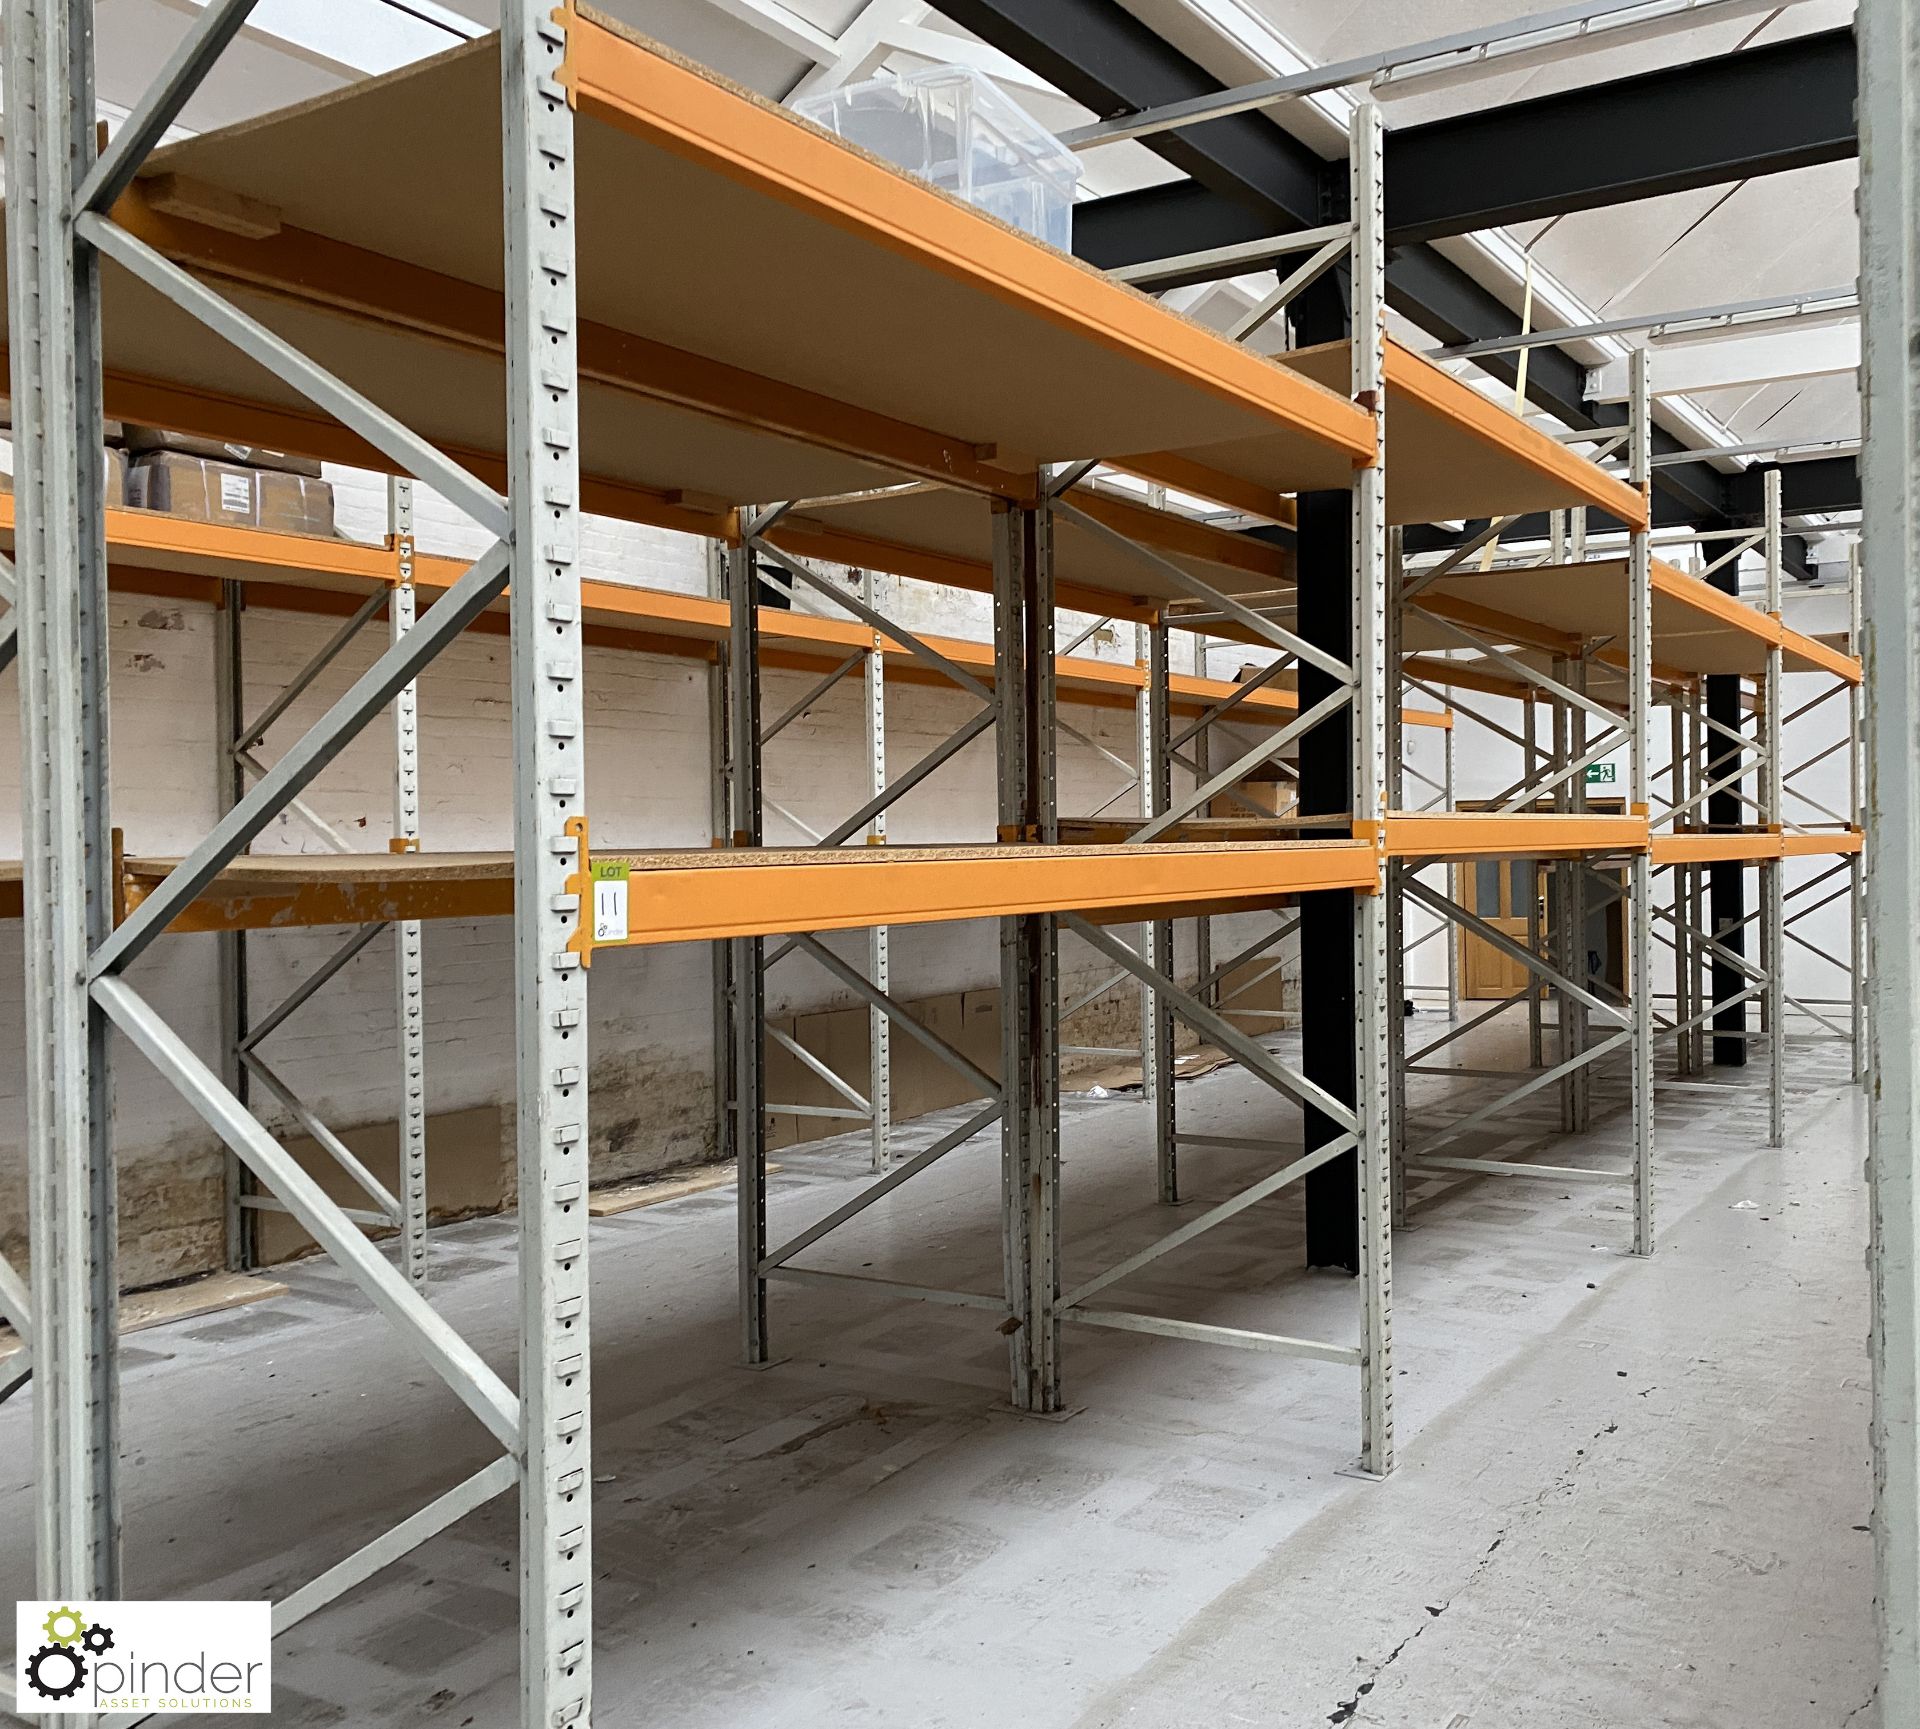 5 bays boltless Pallet Racking, comprising 6 uprights 1100mm x 3600mm high, 20 beams 2700mm x - Image 2 of 7